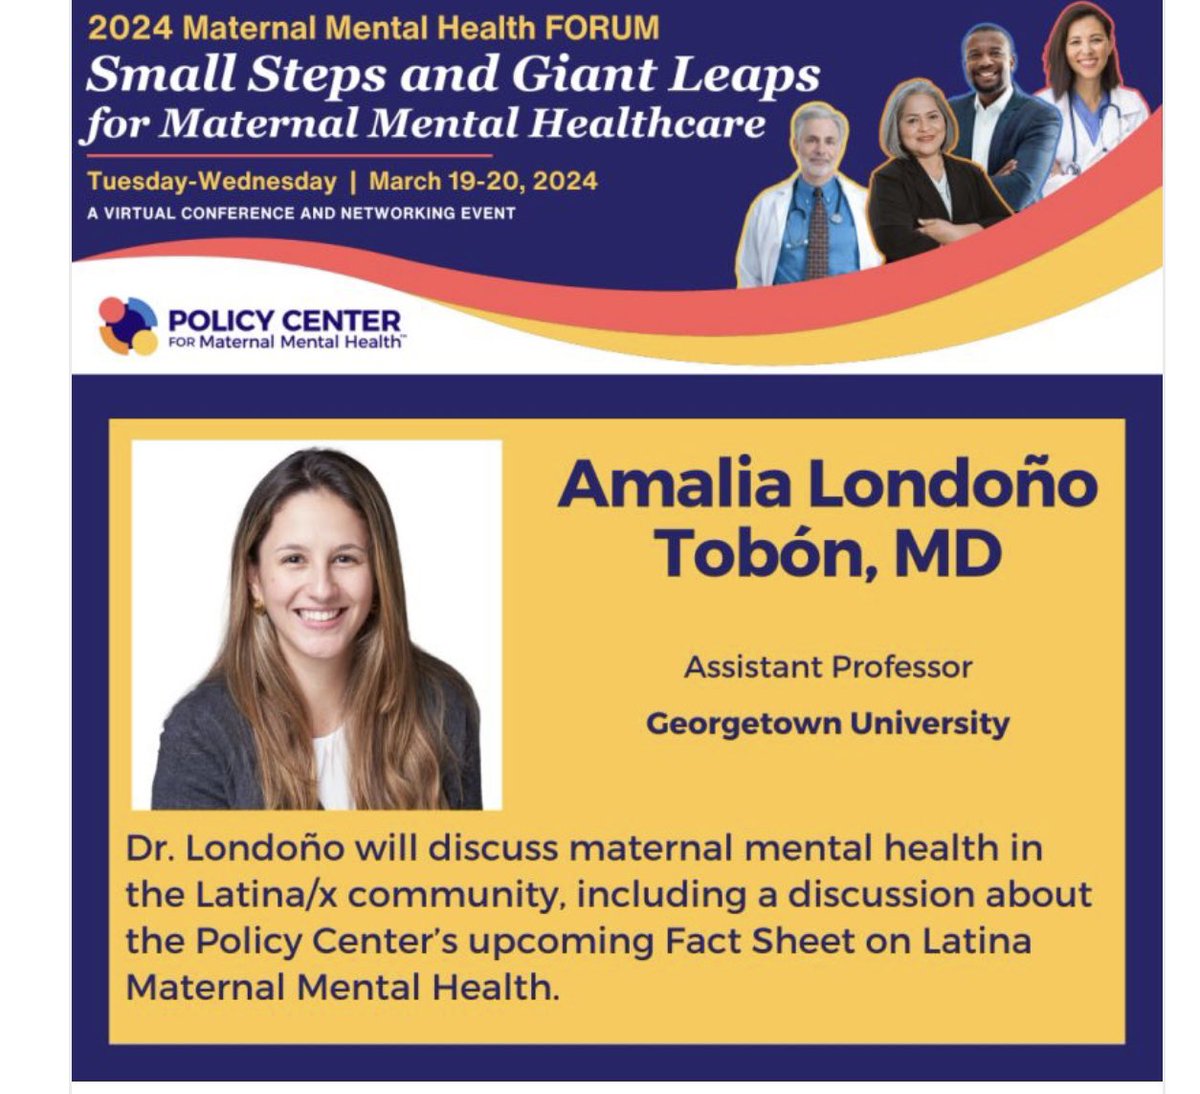 Super excited for the Policy Center for Maternal Mental Health FORUM!! Will be talking about the importance of Latina perinatal #MentalHealth We must close the gap, inequities in care for Latina/x are not acceptable linkedin.com/posts/policyce…